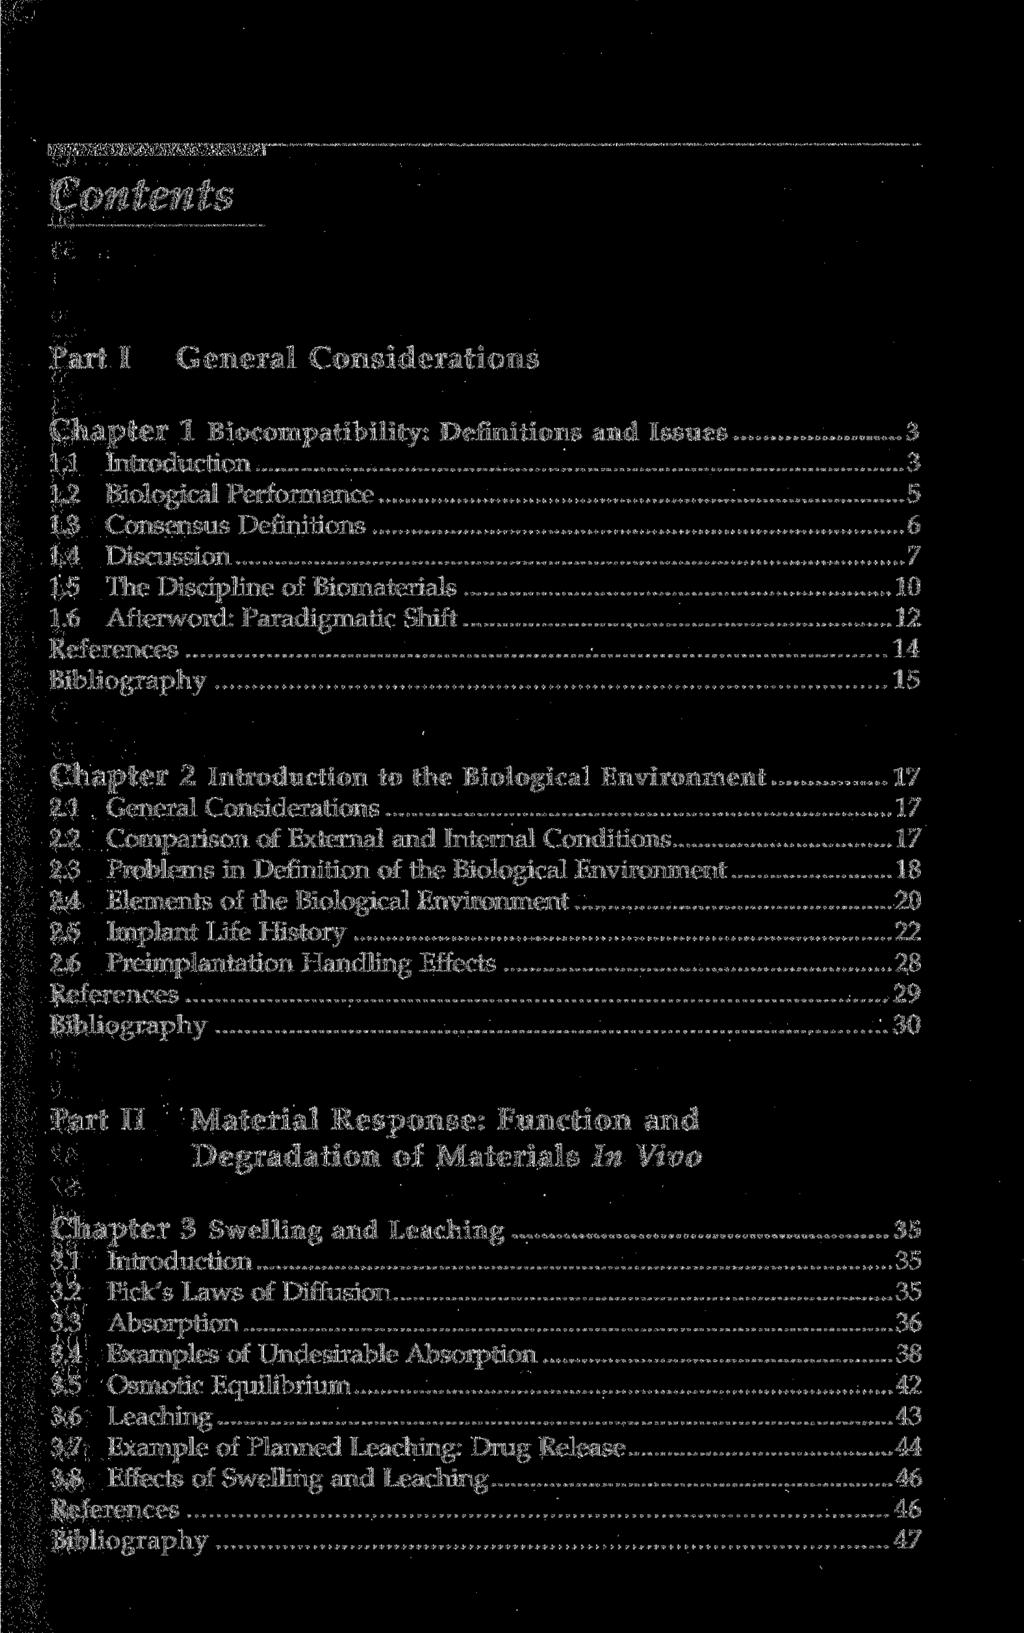 Contents Part I General Considerations Chapter 1 Biocompatibility: Definitions and Issues 3 1.1 Introduction 3 1.2 Biological Performance 5 1.3 Consensus Definitions 6 1.4 Discussion 7 1.